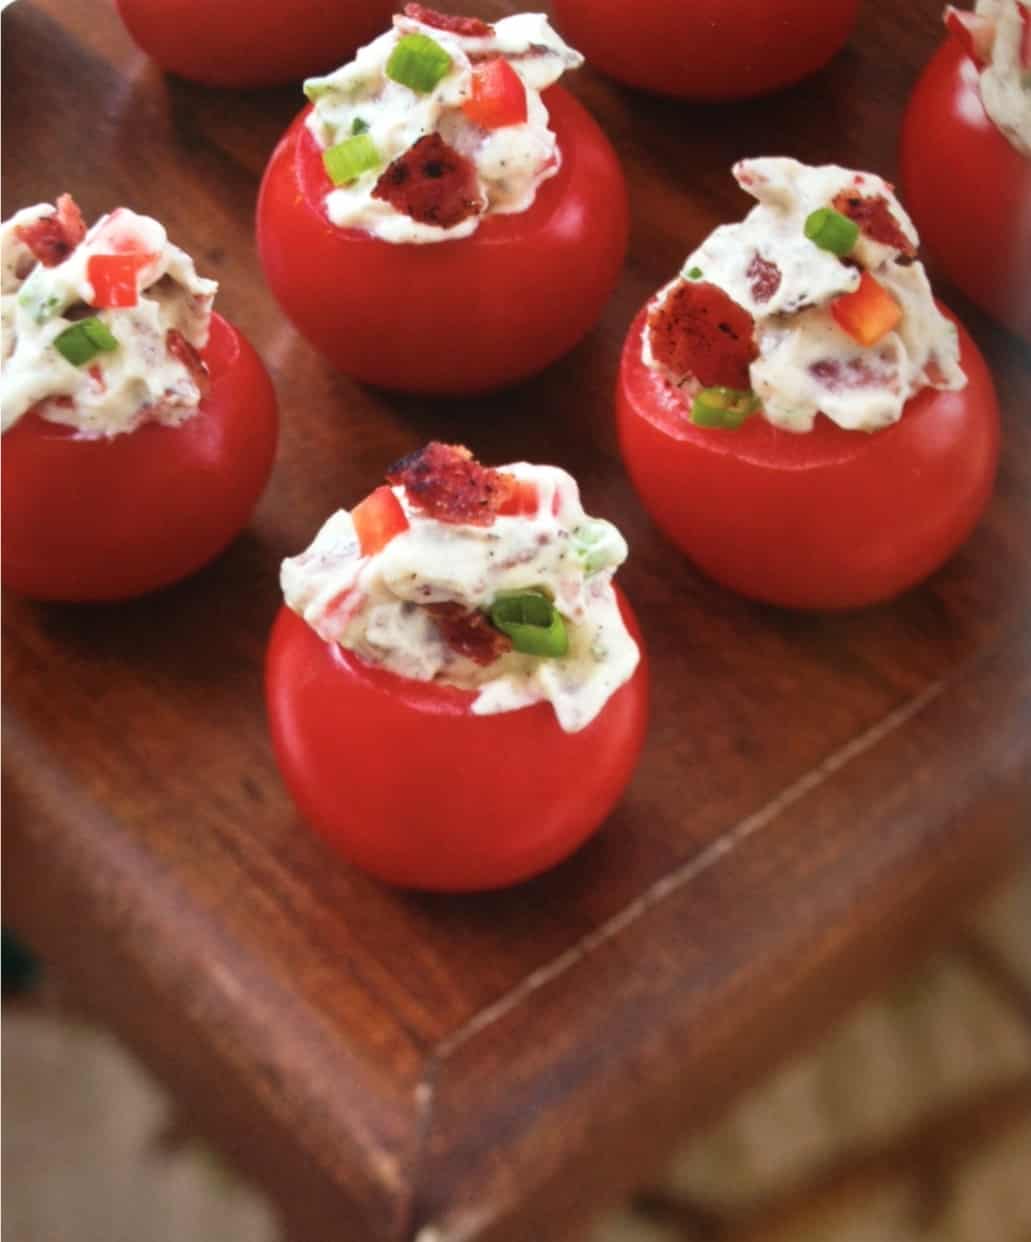 These bacon stuffed cherry tomatoes are a delicious and healthy snack that are simple to make. They are great for dinner parties or a fun, healthy appetizer!